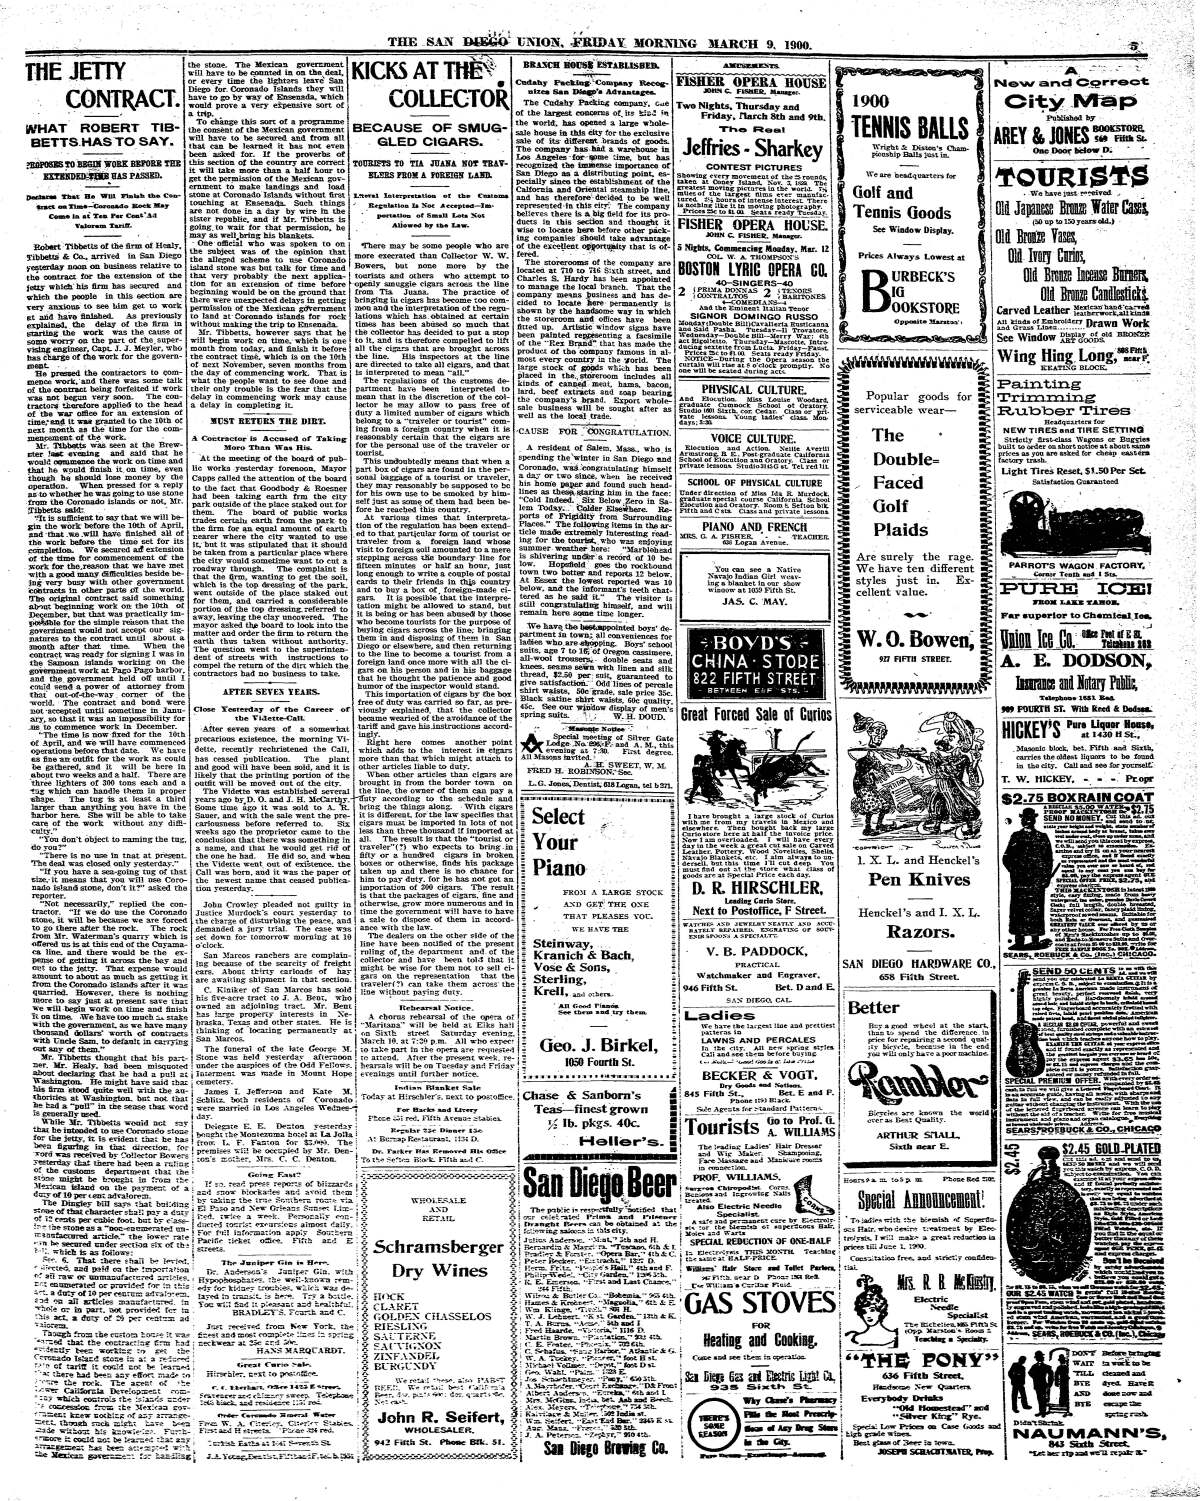 Inside page of The San Diego Union, March 9, 1900.